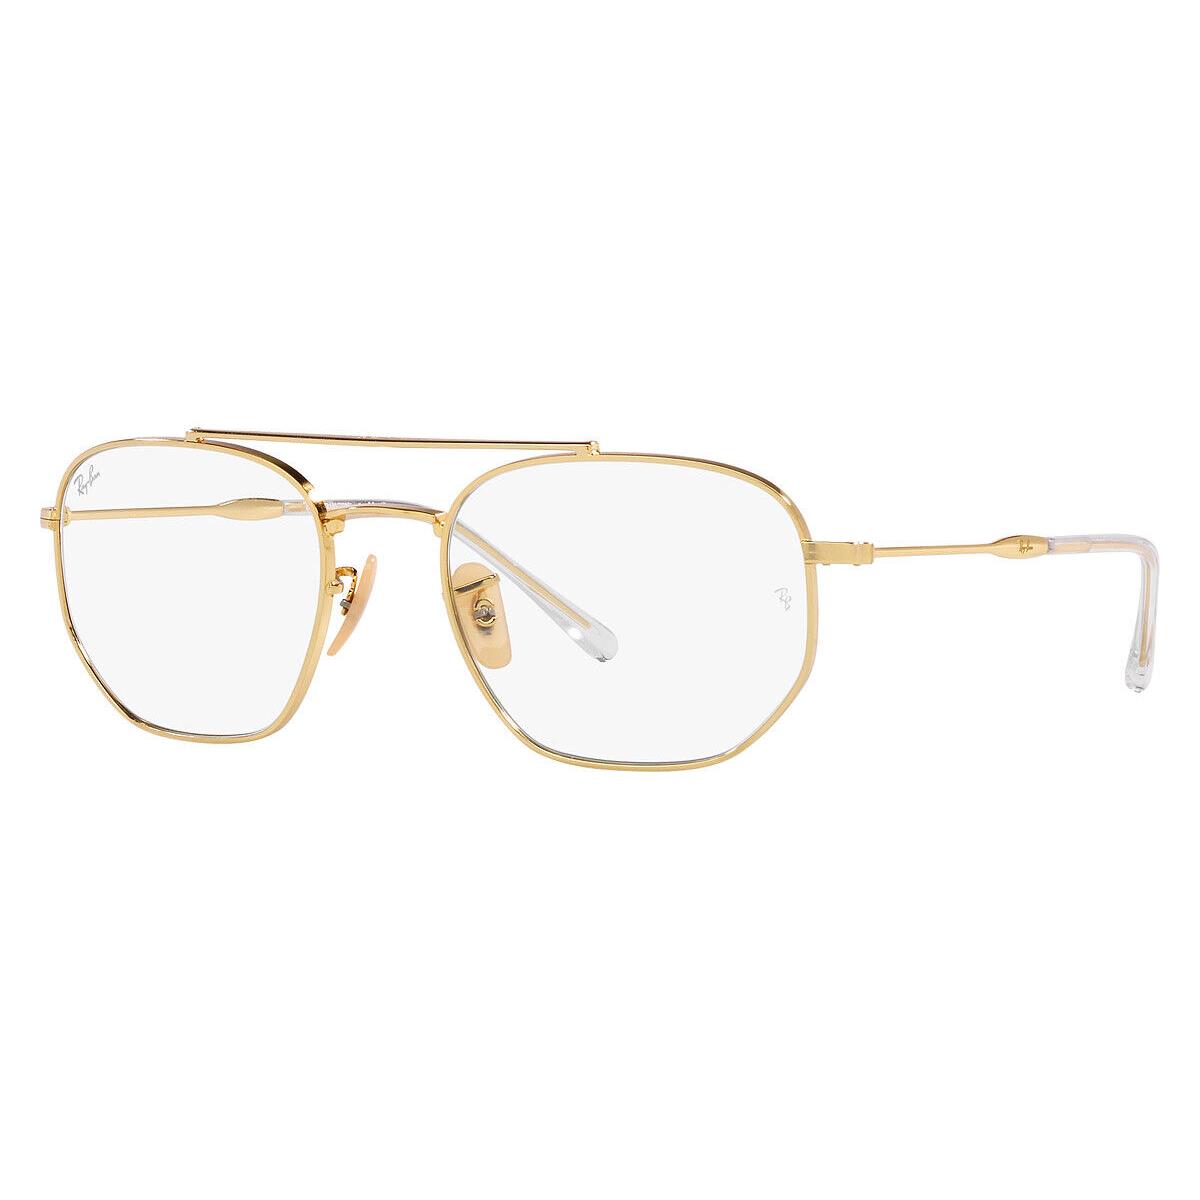 Ray-ban RB3707 Sunglasses Gold Clear/blue Photochromic 54mm - Frame: Gold / Clear/Blue Photochromic, Lens: Clear/Blue Photochromic